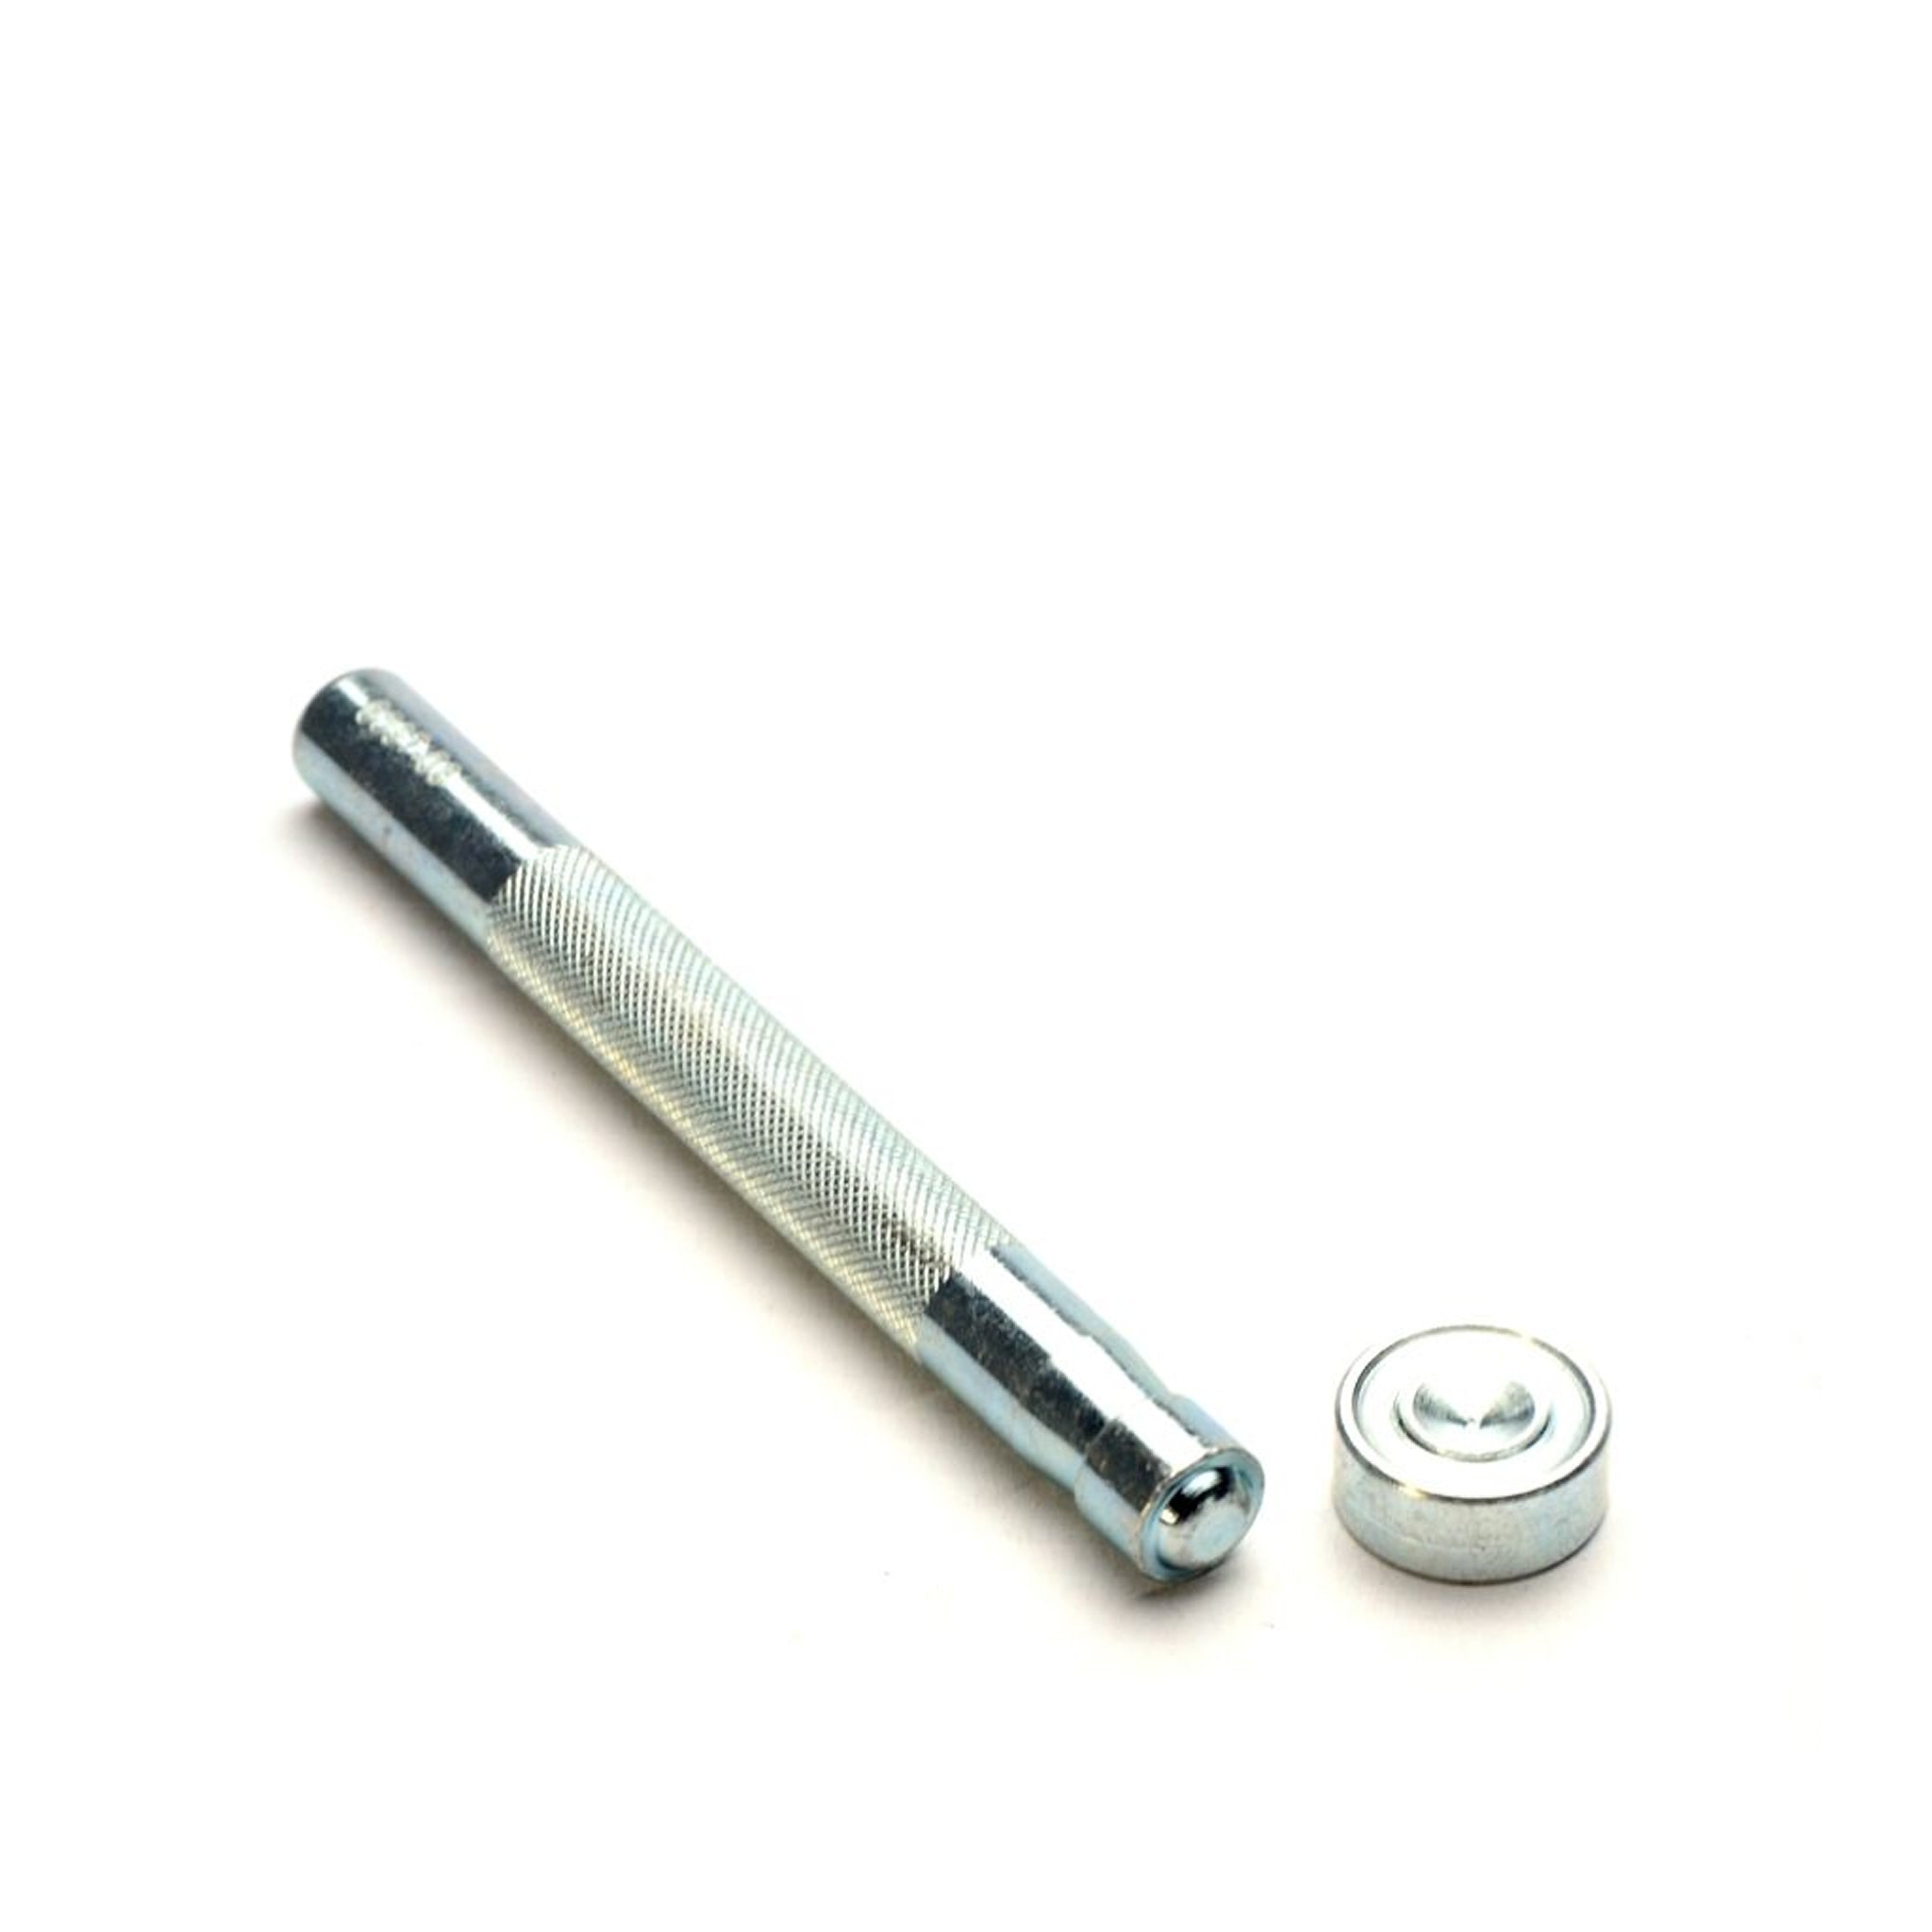 Setting tool for 8mm (5/16") grommets from Identity Leathercraft